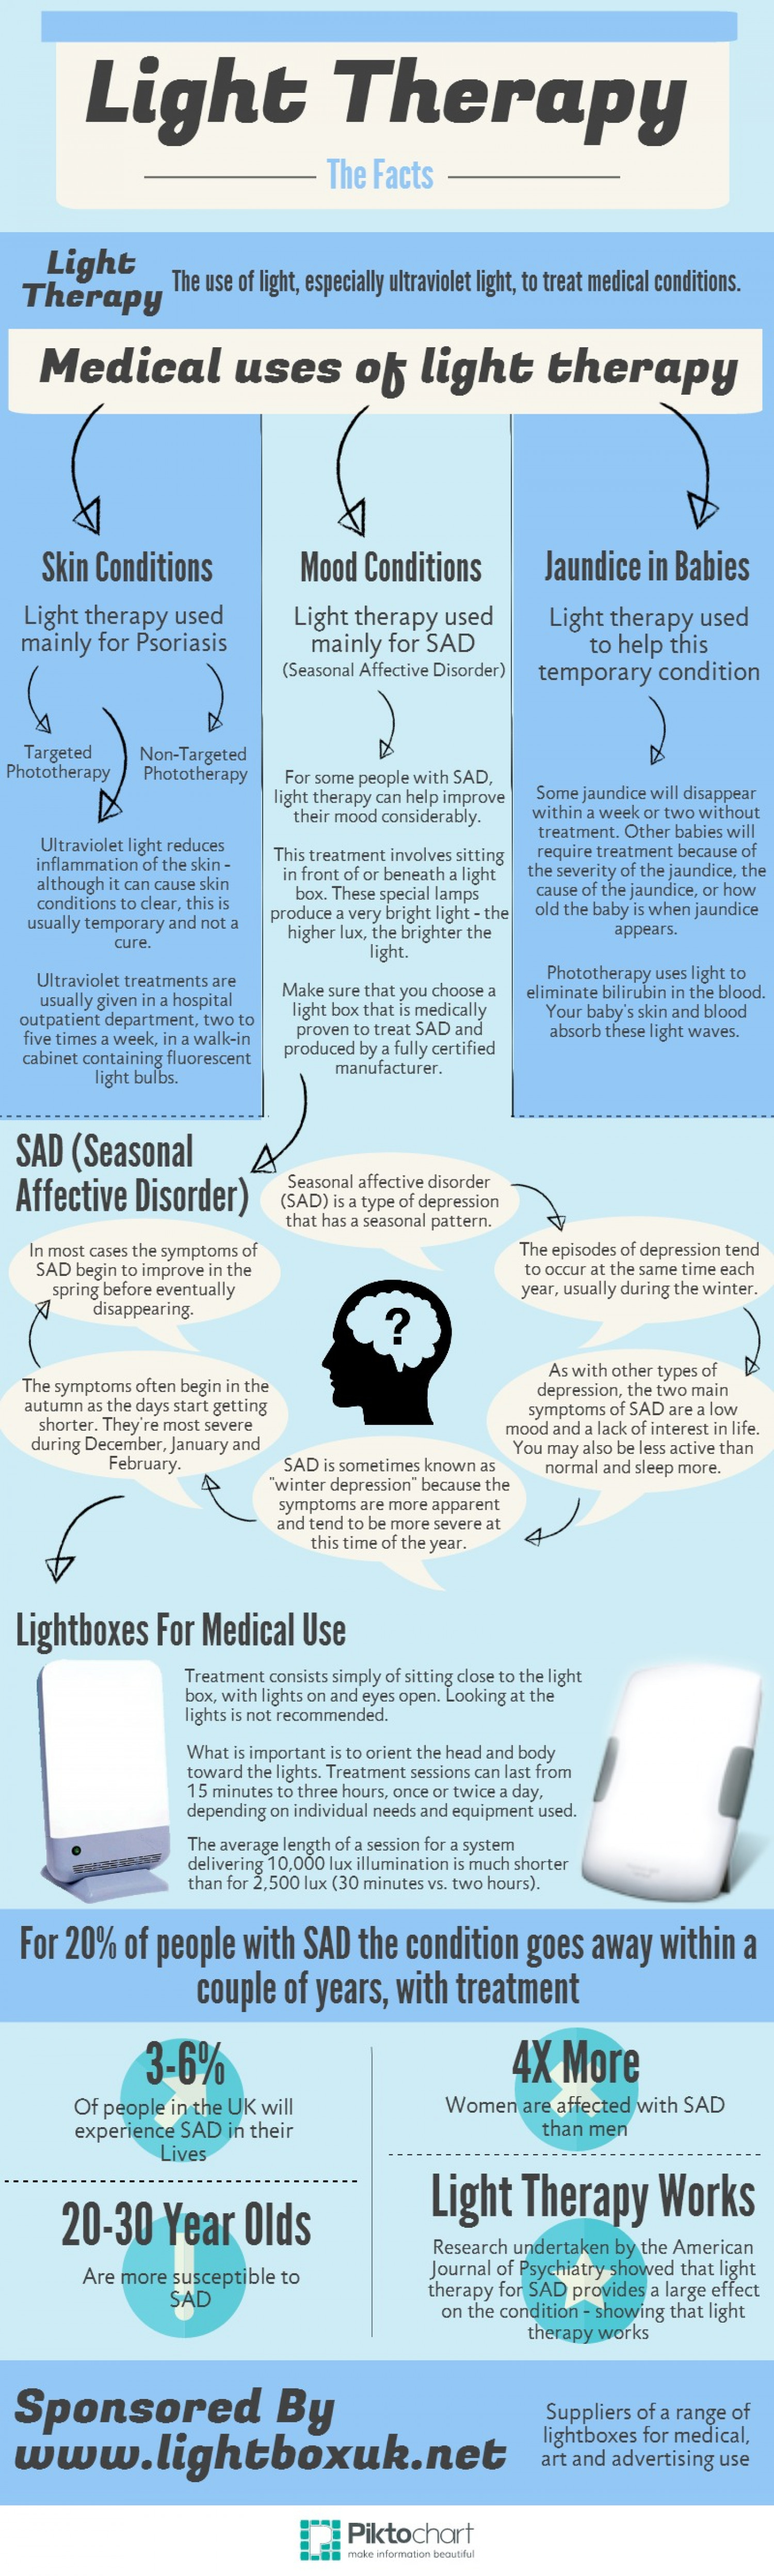 Light Therapy The Facts Infographic